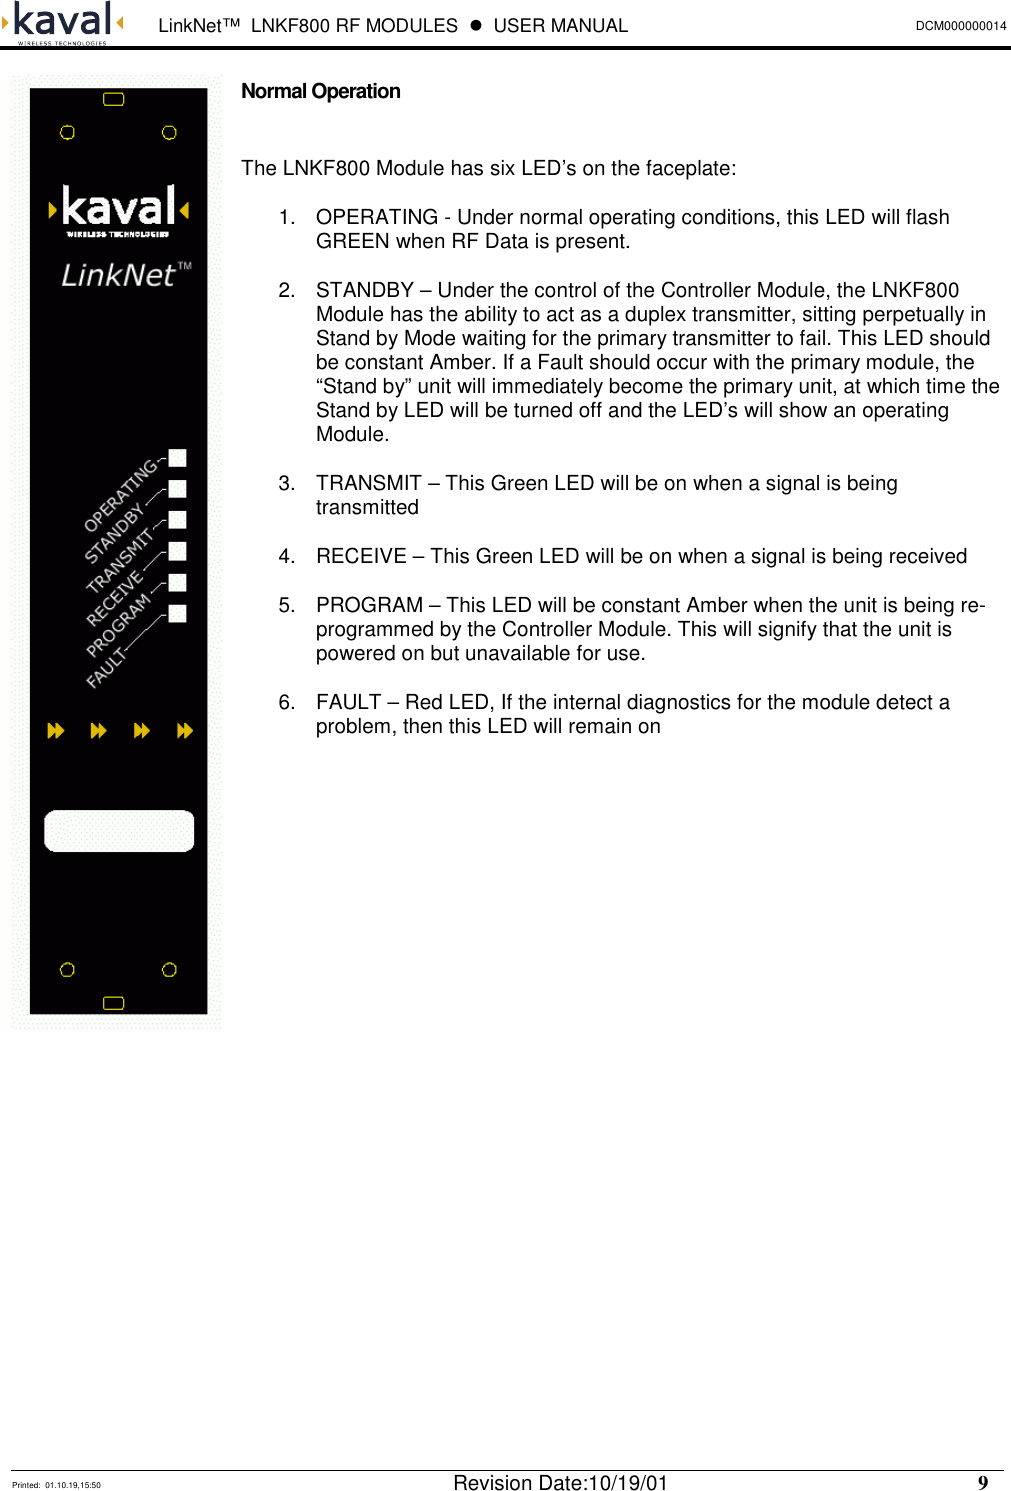  LinkNet™  LNKF800 RF MODULES  !  USER MANUAL DCM000000014   Printed:  01.10.19,15:50  Revision Date:10/19/01    9   Normal Operation  The LNKF800 Module has six LED’s on the faceplate: 1.  OPERATING - Under normal operating conditions, this LED will flash GREEN when RF Data is present. 2.  STANDBY – Under the control of the Controller Module, the LNKF800 Module has the ability to act as a duplex transmitter, sitting perpetually in Stand by Mode waiting for the primary transmitter to fail. This LED should be constant Amber. If a Fault should occur with the primary module, the “Stand by” unit will immediately become the primary unit, at which time the Stand by LED will be turned off and the LED’s will show an operating Module. 3.  TRANSMIT – This Green LED will be on when a signal is being transmitted 4.  RECEIVE – This Green LED will be on when a signal is being received 5.  PROGRAM – This LED will be constant Amber when the unit is being re-programmed by the Controller Module. This will signify that the unit is powered on but unavailable for use. 6.  FAULT – Red LED, If the internal diagnostics for the module detect a problem, then this LED will remain on              